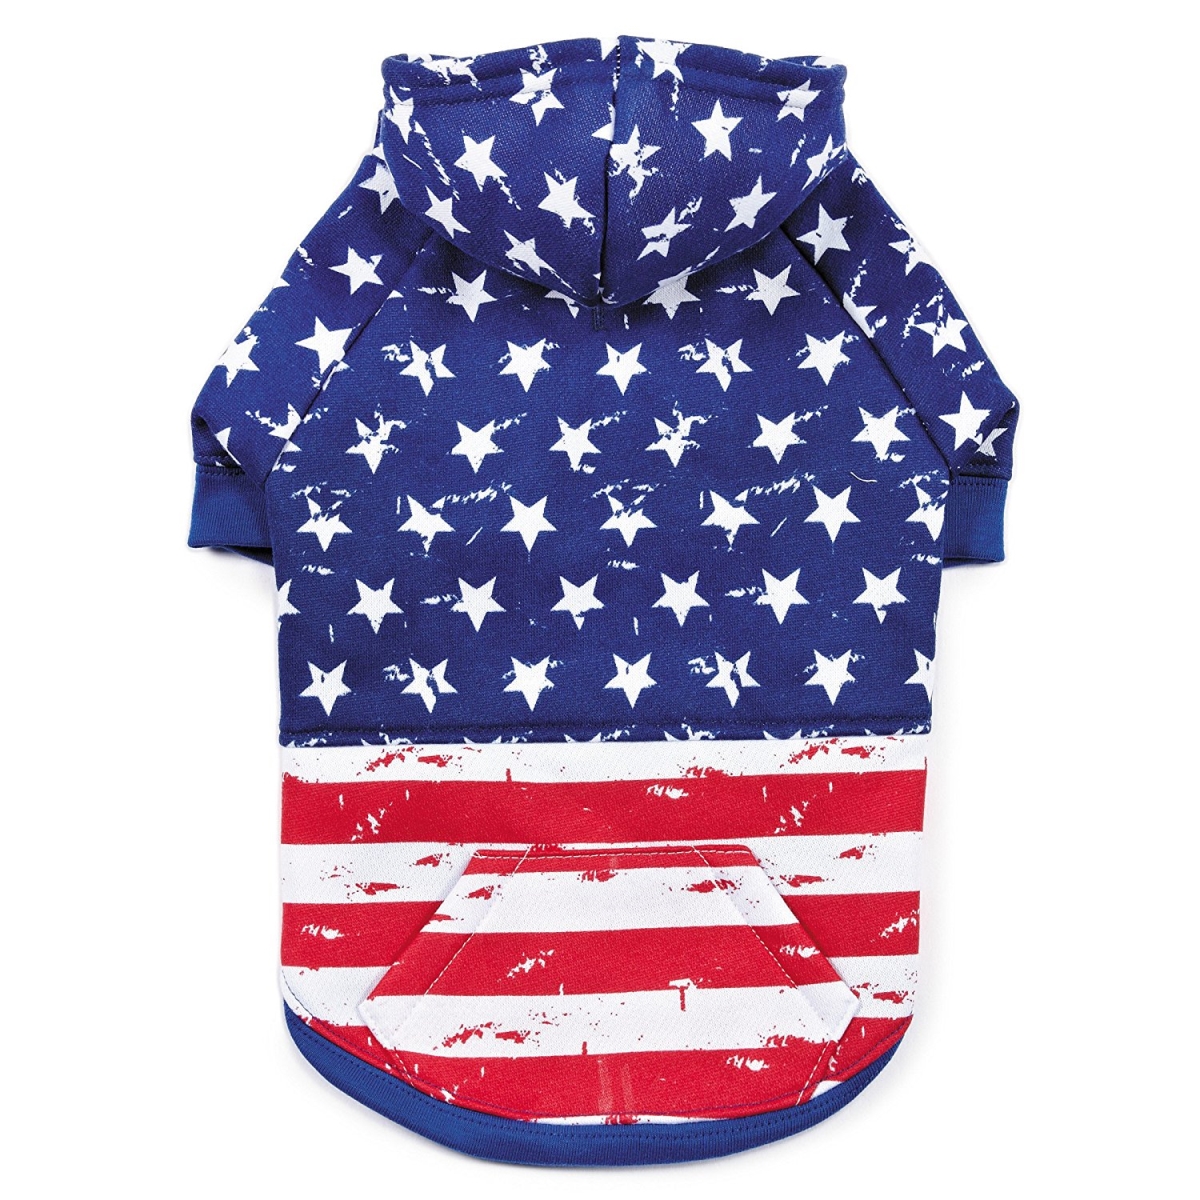 Zack & Zoey Distressed American Flag Hoodie For Dogs - Large